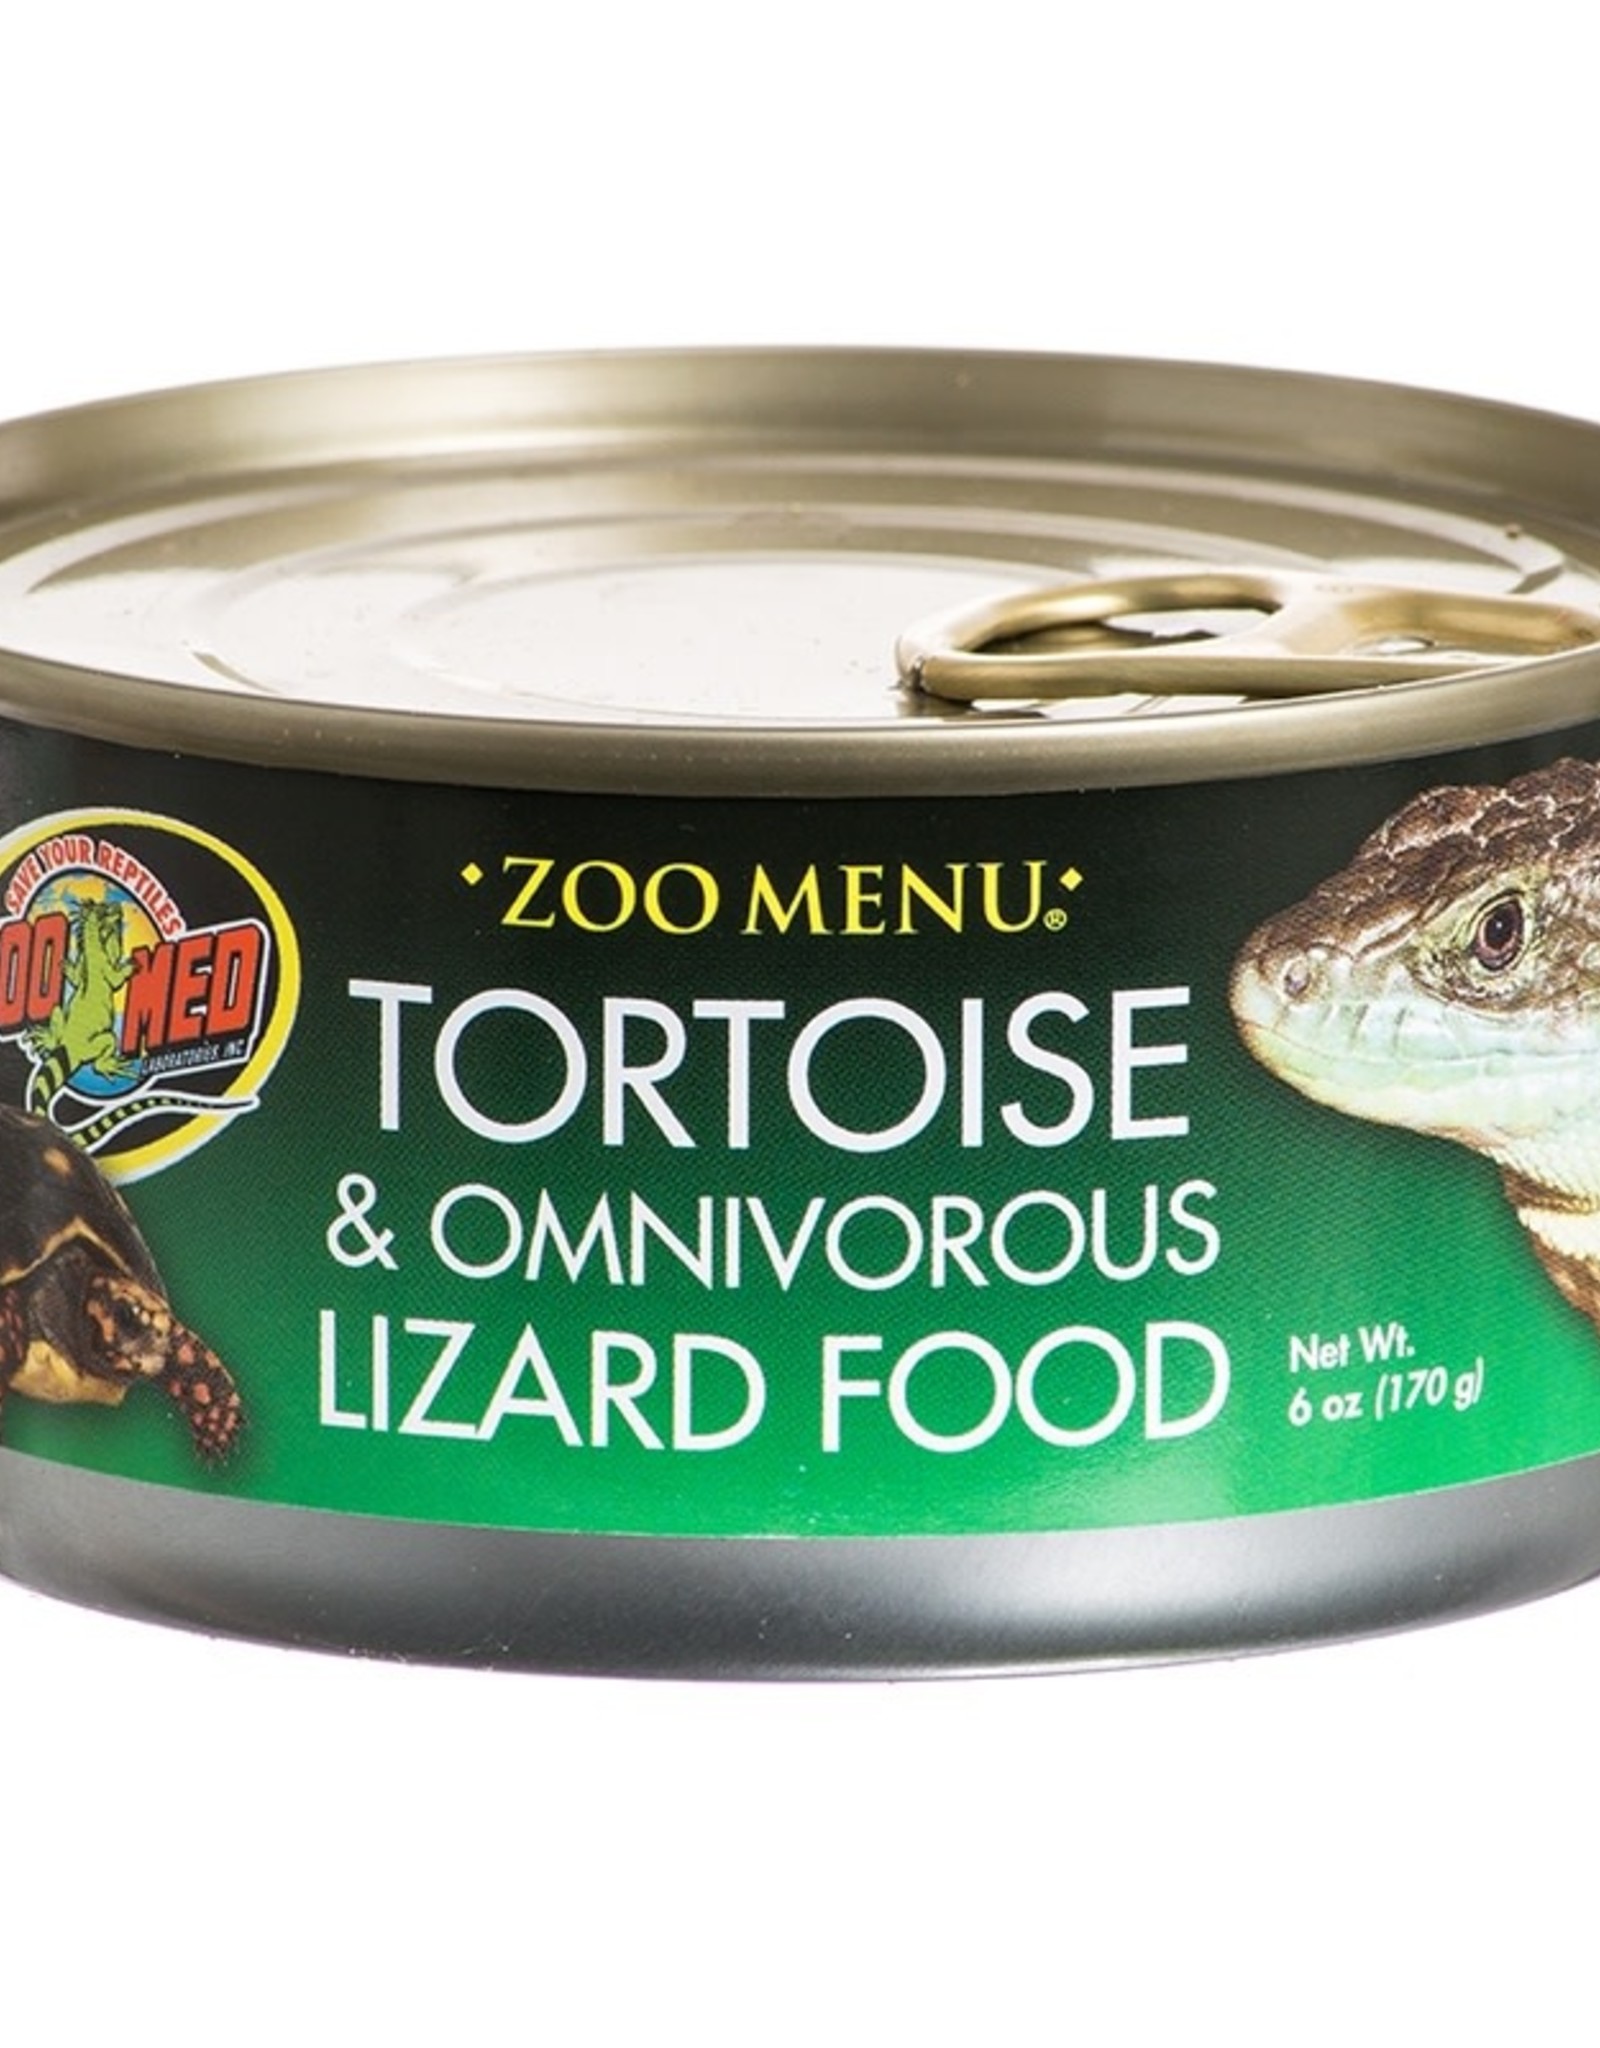 ZOO MED LABORATORIES, INC. ZOO MED ZM-30- CANNED FOOD- TORTOISE AND OMNIVOROUS LIZARD- 6 OZ